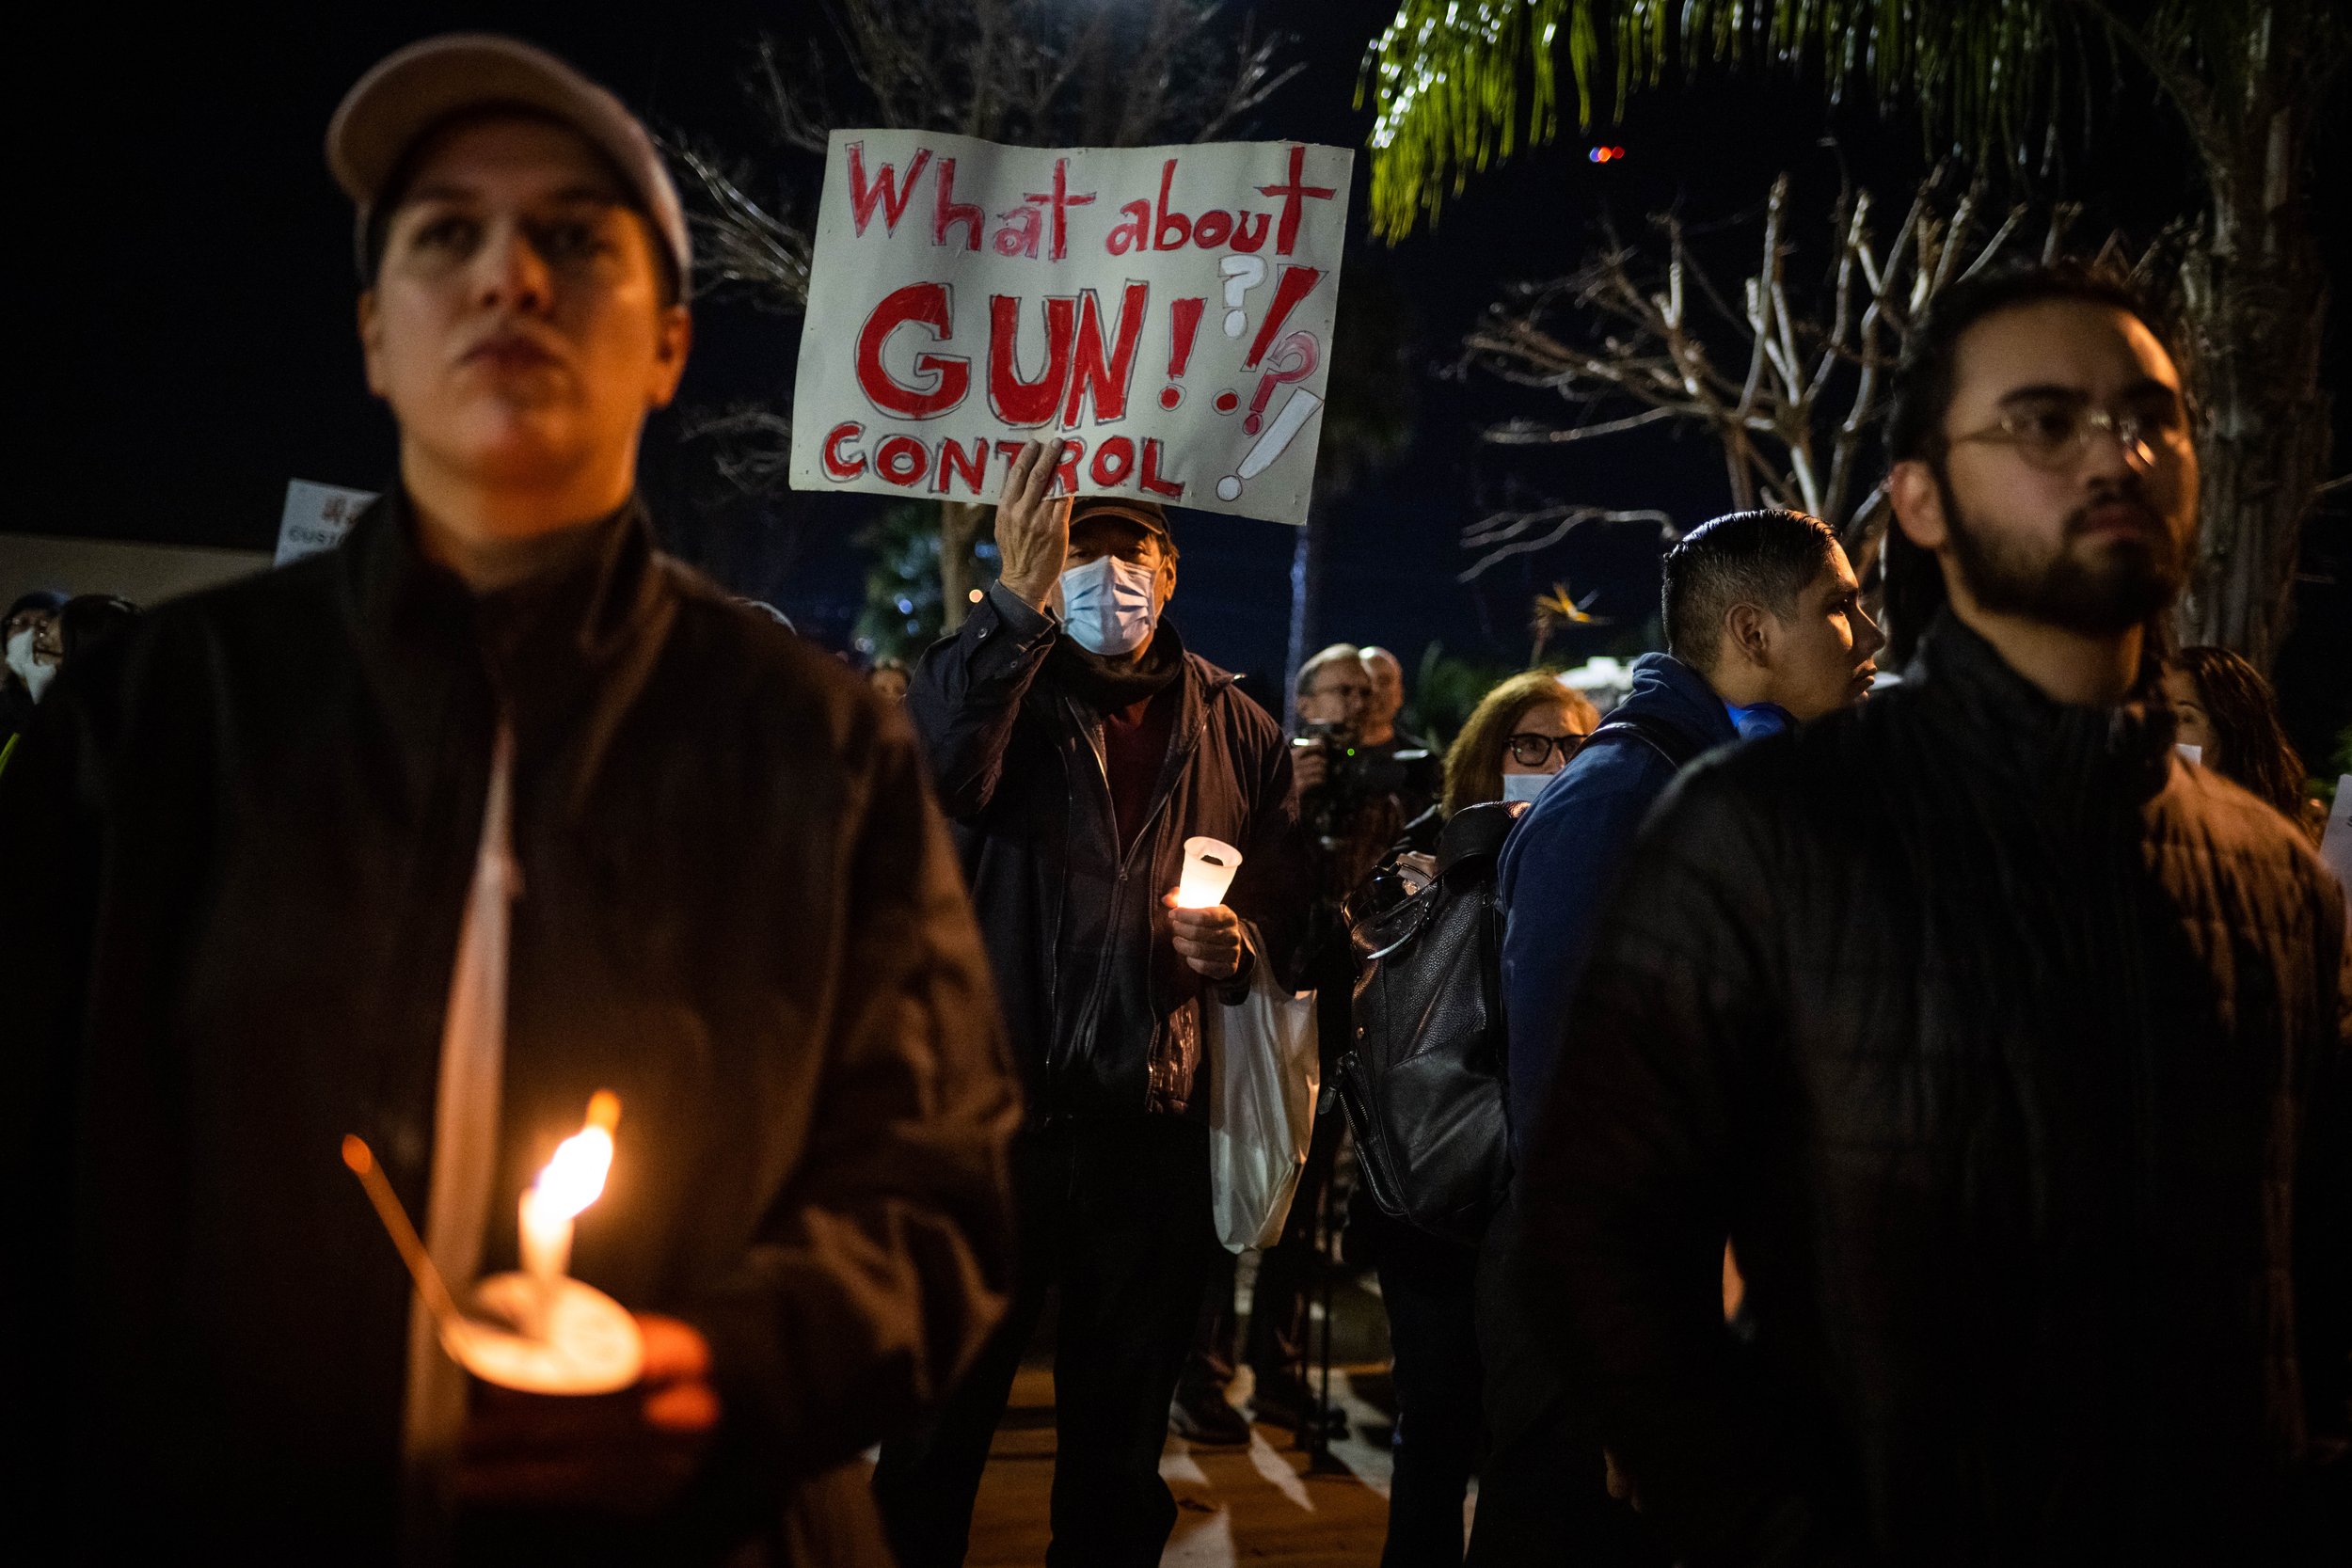  Jim Vega protests for gun control during a vigil for the Monterey Park mass shooting victims at the Star Ballroom Dance Studio on Wednesday, January 25, 2023 in Monterey Park.  